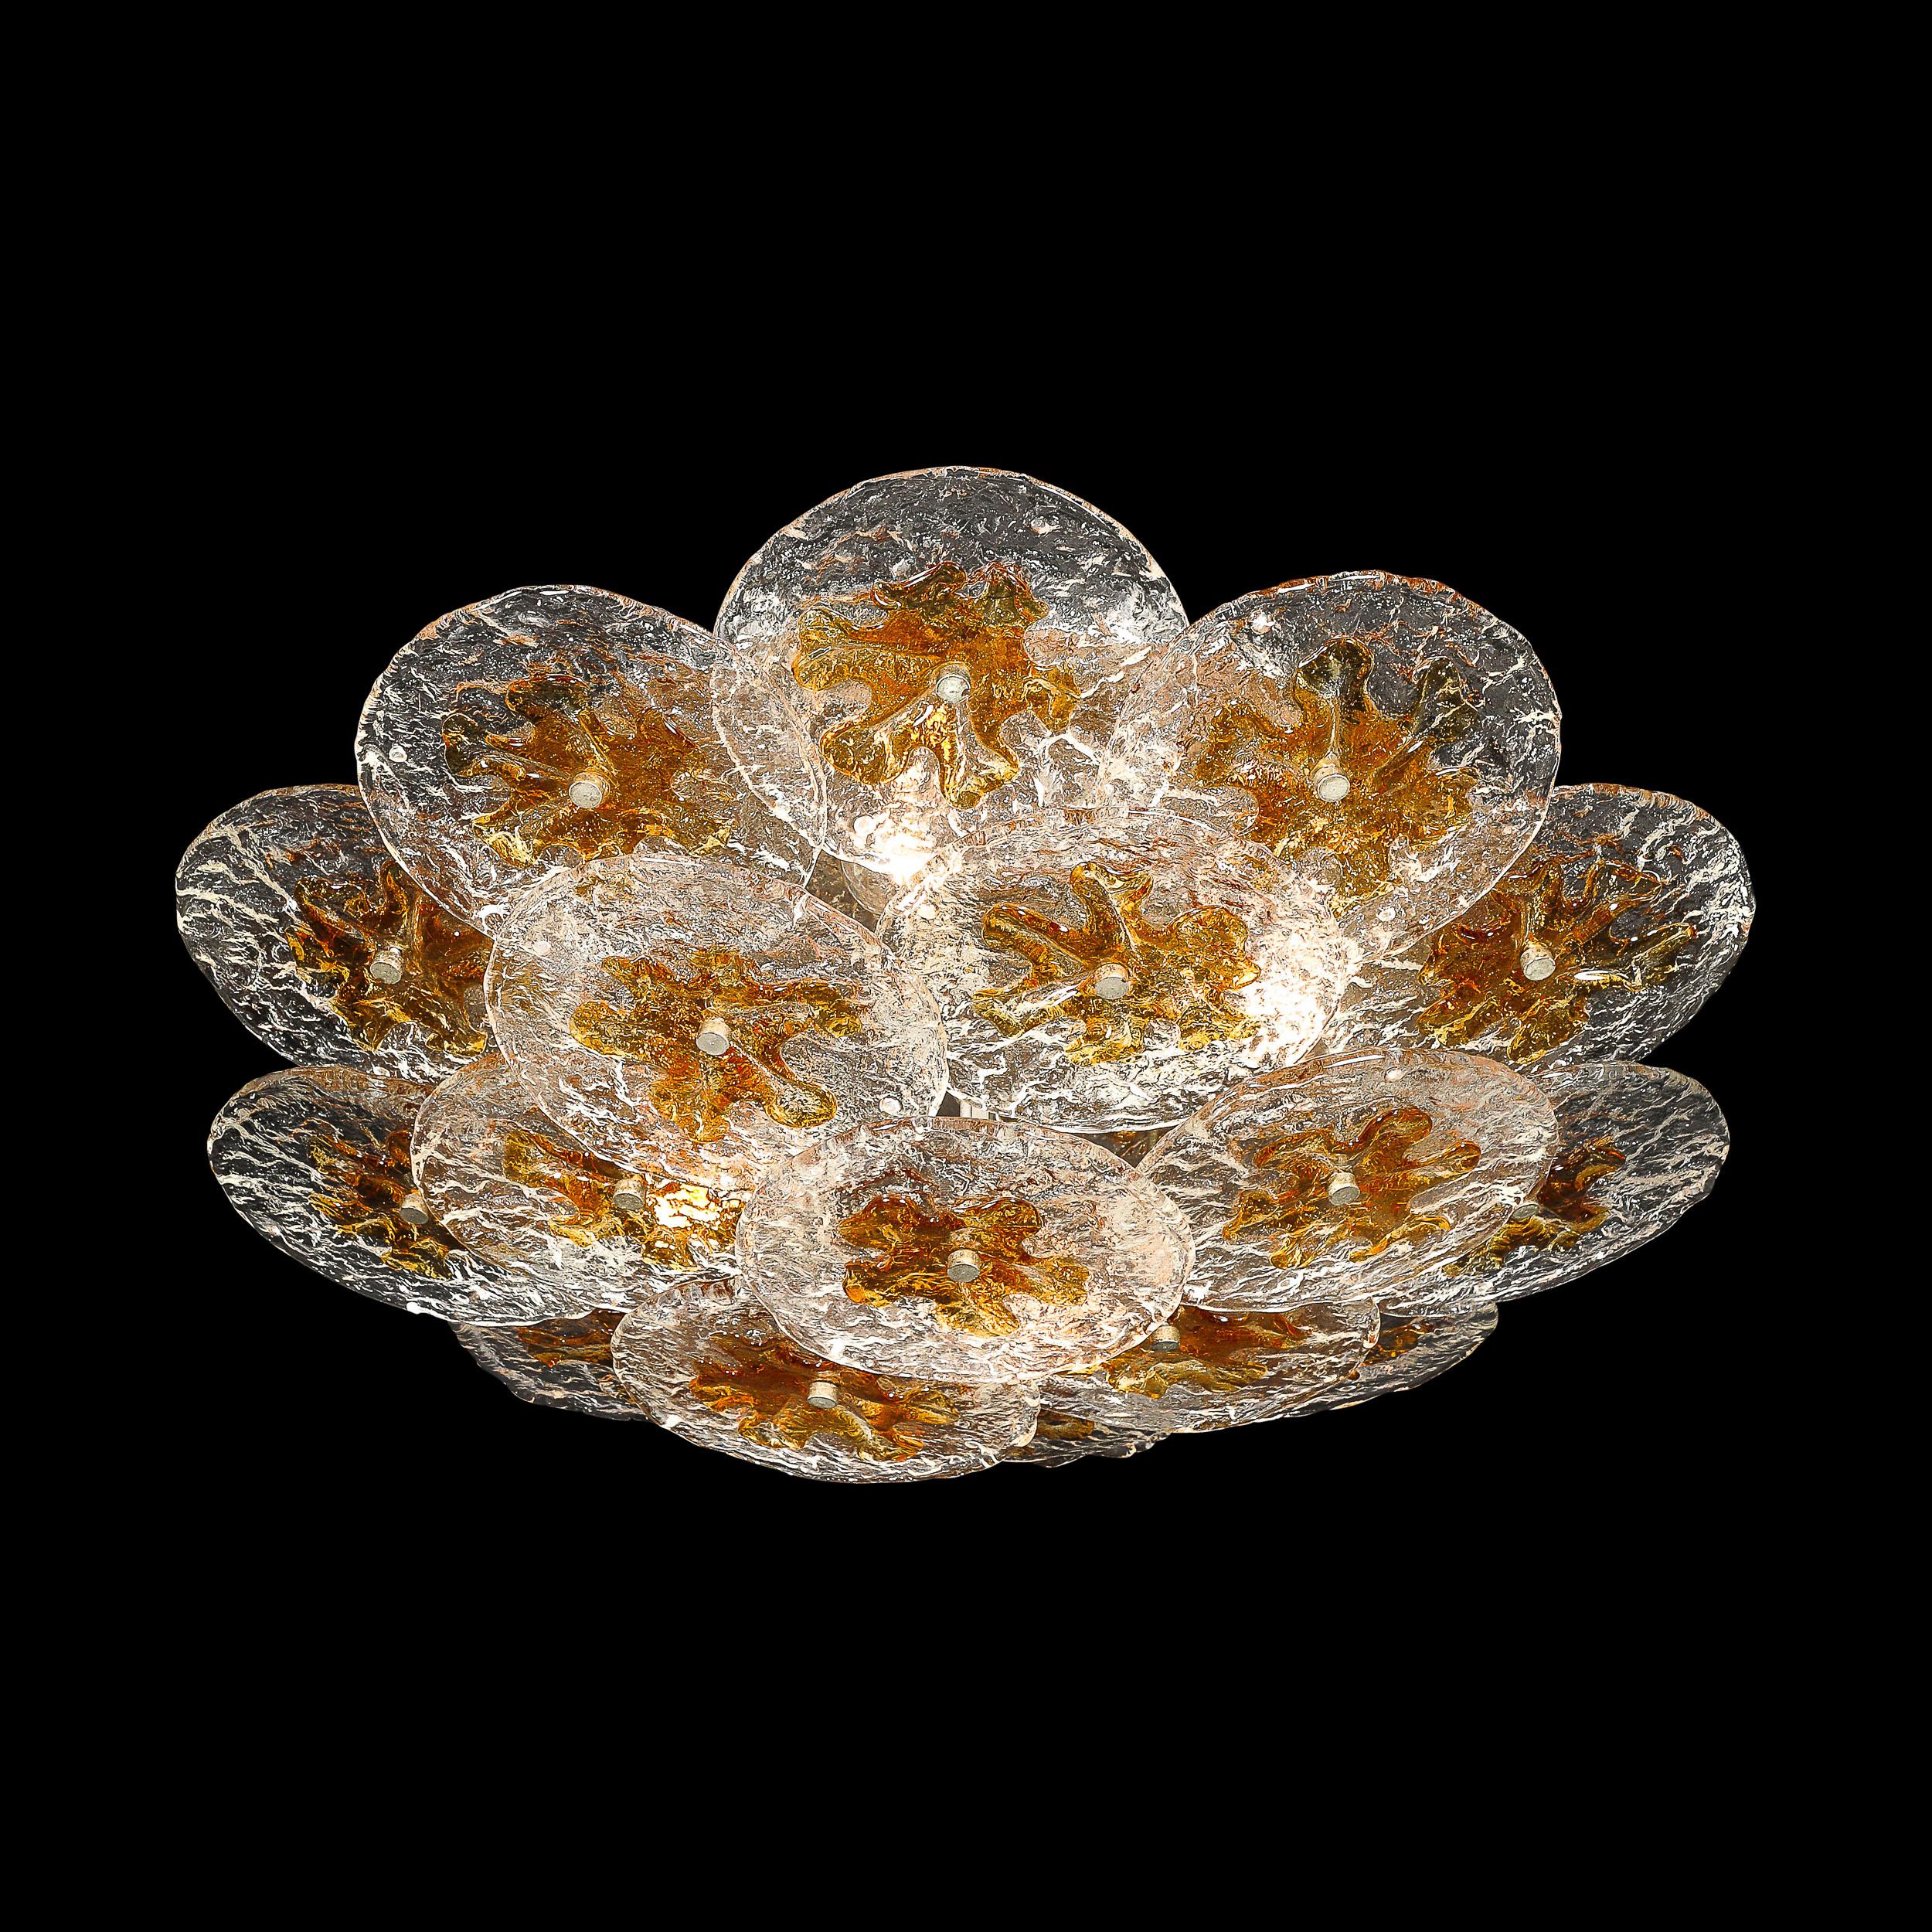 This stunning and elegant Mid-Century Modernist Hand-Blown Murano Mottled Glass Disk Chandelier in Amber is by the esteemed designer and glass artist Mazzega and originates from Italy, Circa 1970. Features a shallow rounded composition composed of